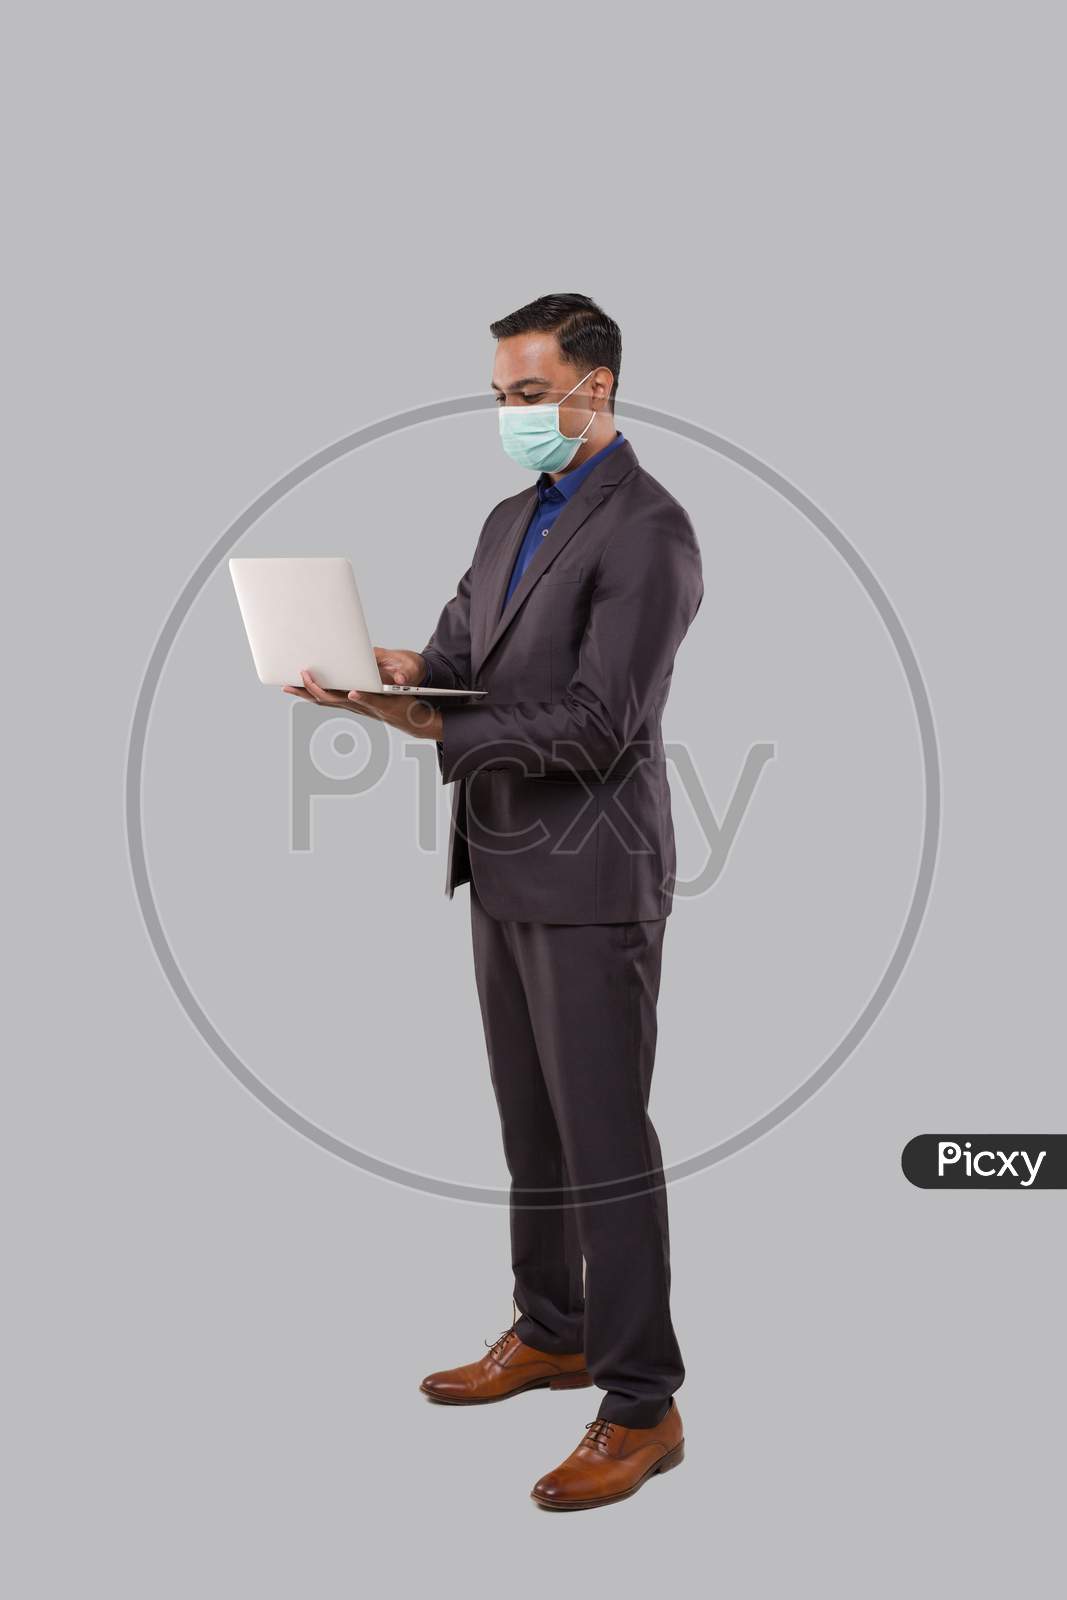 Businessman Using Laptop Green Screen Isolated Wearing Medical Mask. Indian Business Man With Laptop In Hands. Online Business Concept